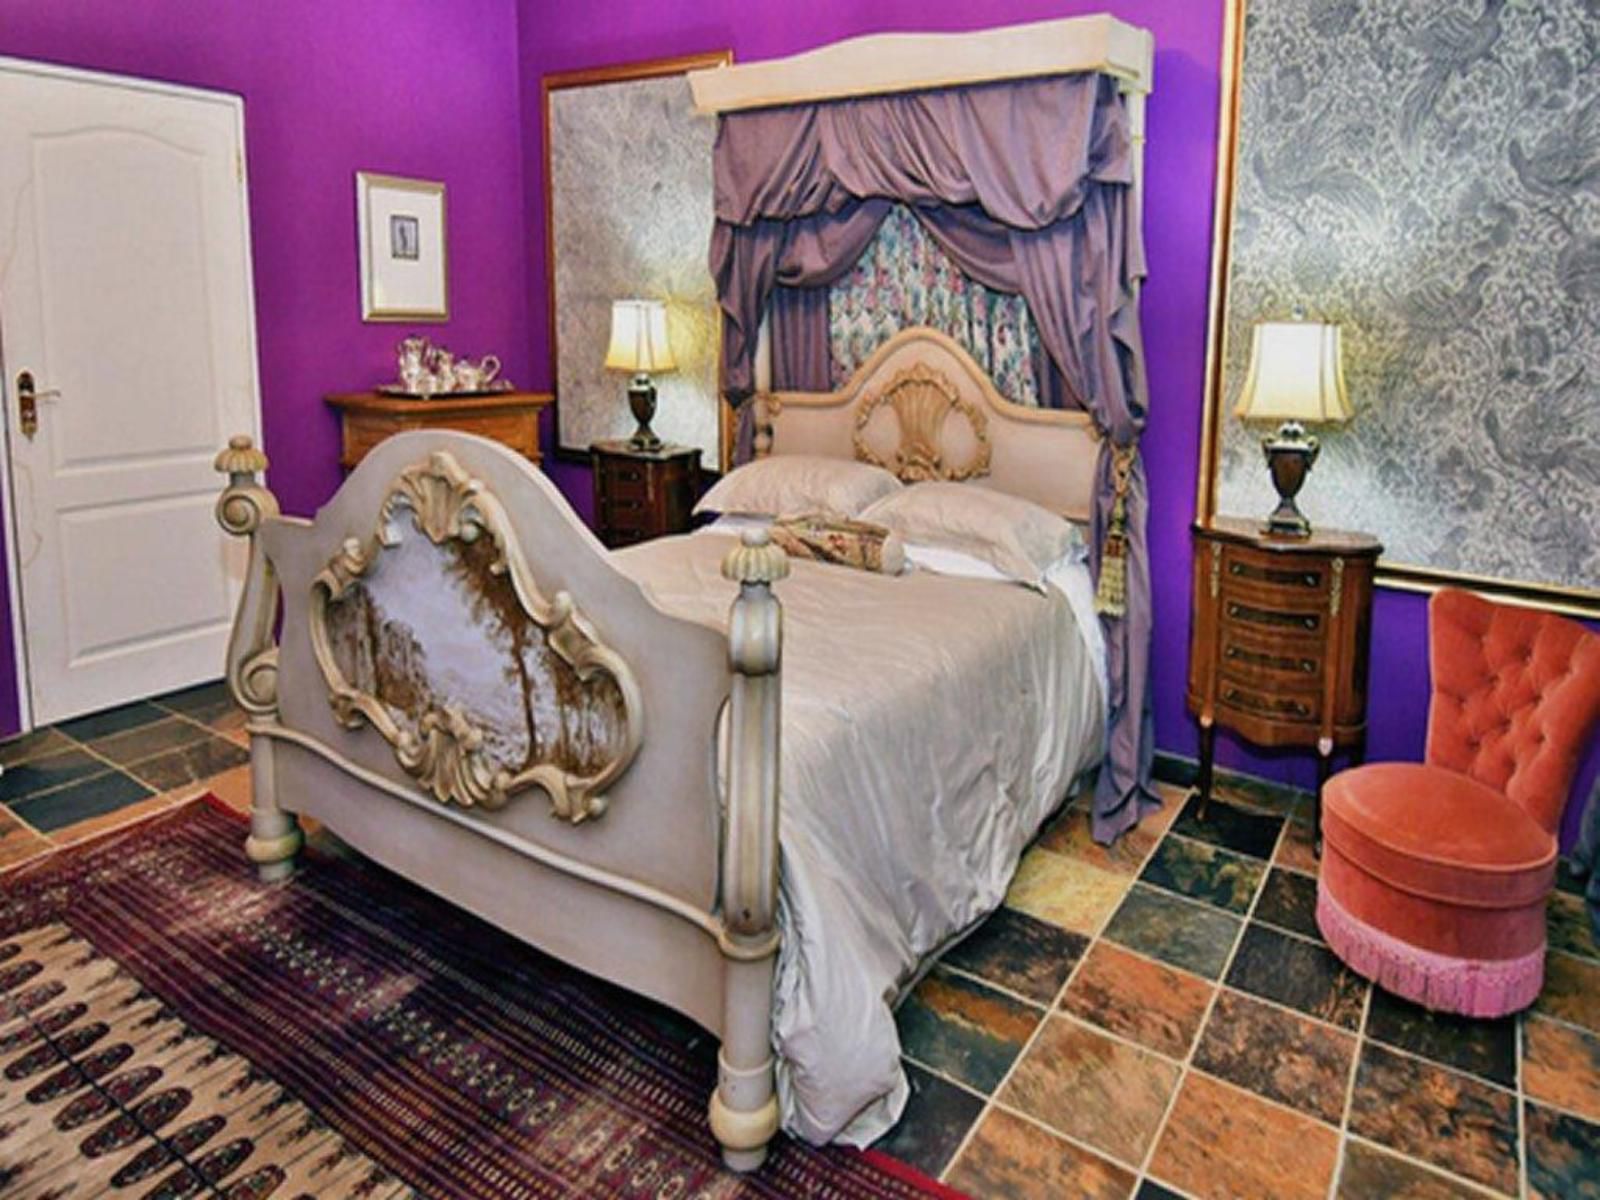 House Of Visconti Morningside Ct Somerset West Western Cape South Africa Bedroom